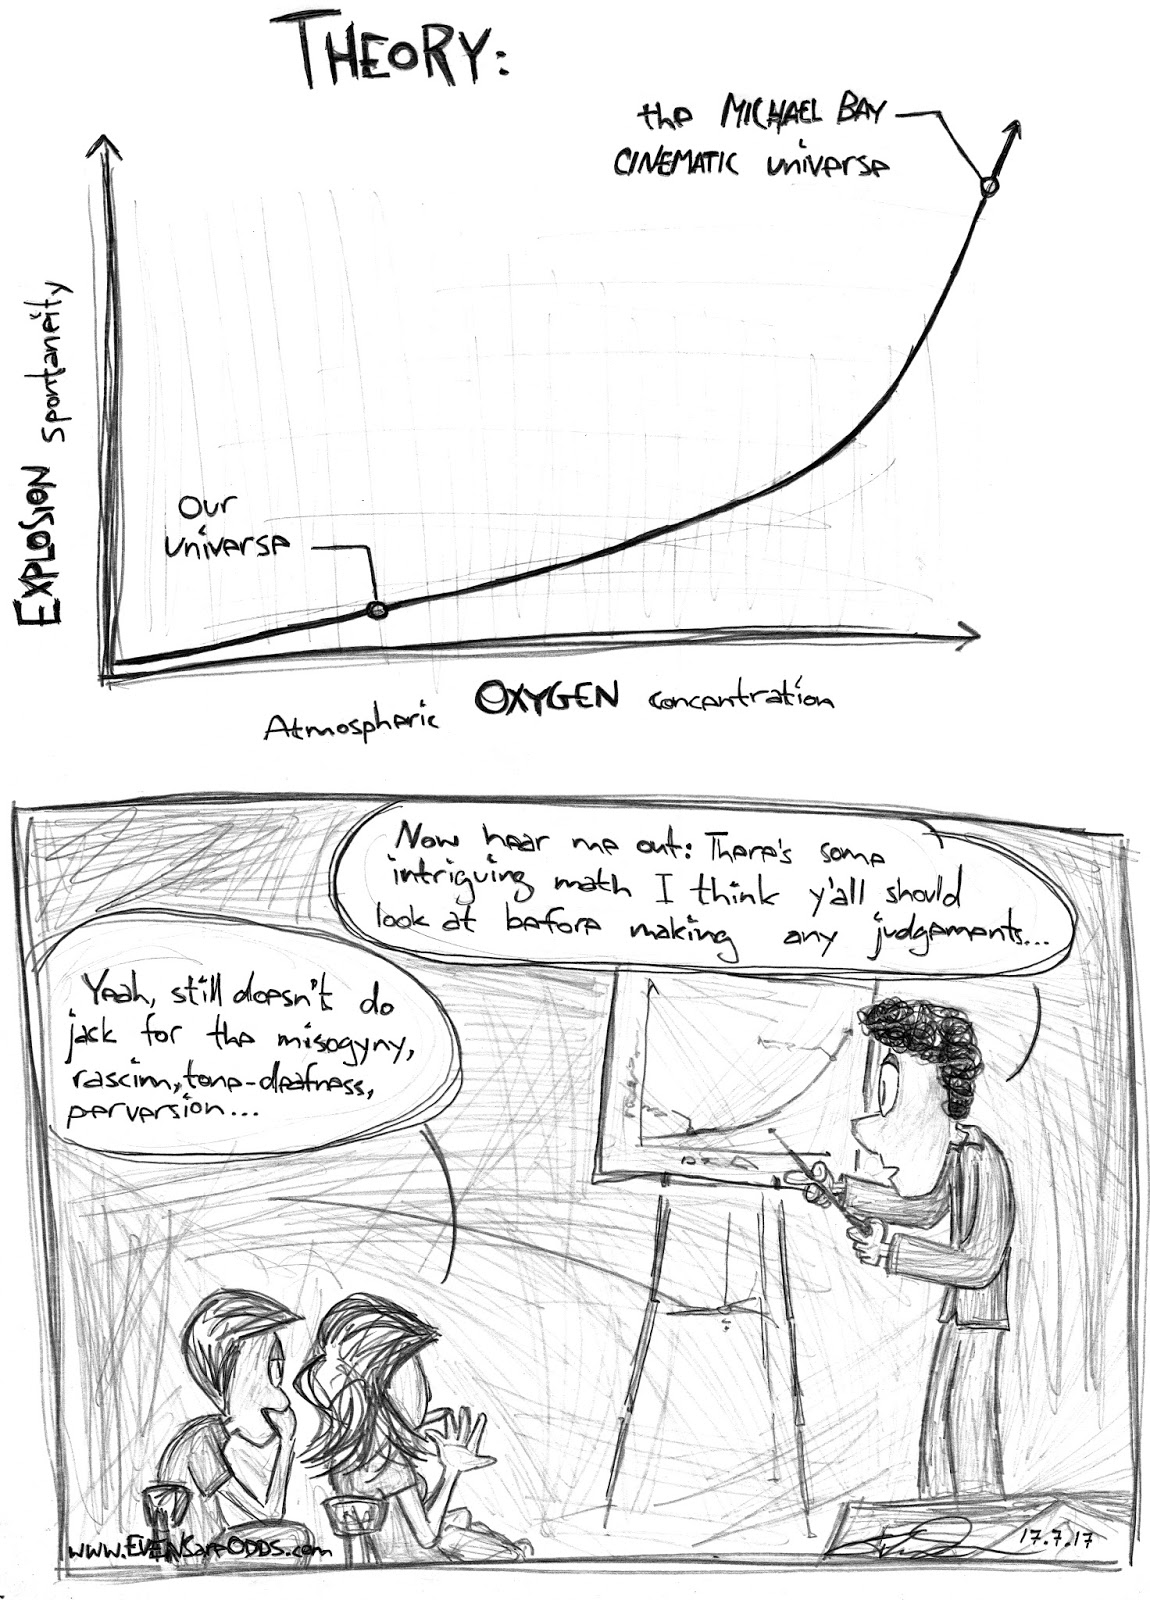 *Graph depicting exponential correlation between "Atmospheric OXYGEN Concentration" and "EXPLOSION Spontaneity", with "Our Universe" at ~20% oxygen with a near zero chance of spontaneous explosion, and the "MICHAEL BAY CINEMATIC Universe" with an alarmingly high chance of spontaneous explosion at nearly 100% atmospheric oxygen.*  ~ TEDDY: *Presenting chart to audience of Allison and Mark* "Now hear me out: There's some intriguing math I think y'all should look at before making any judgments..."  *Mark looking on, unconvinced*  ALLISON: "Yeah, still doesn't do  jack for the misogyny, racism, tone-deafness, perversion..."